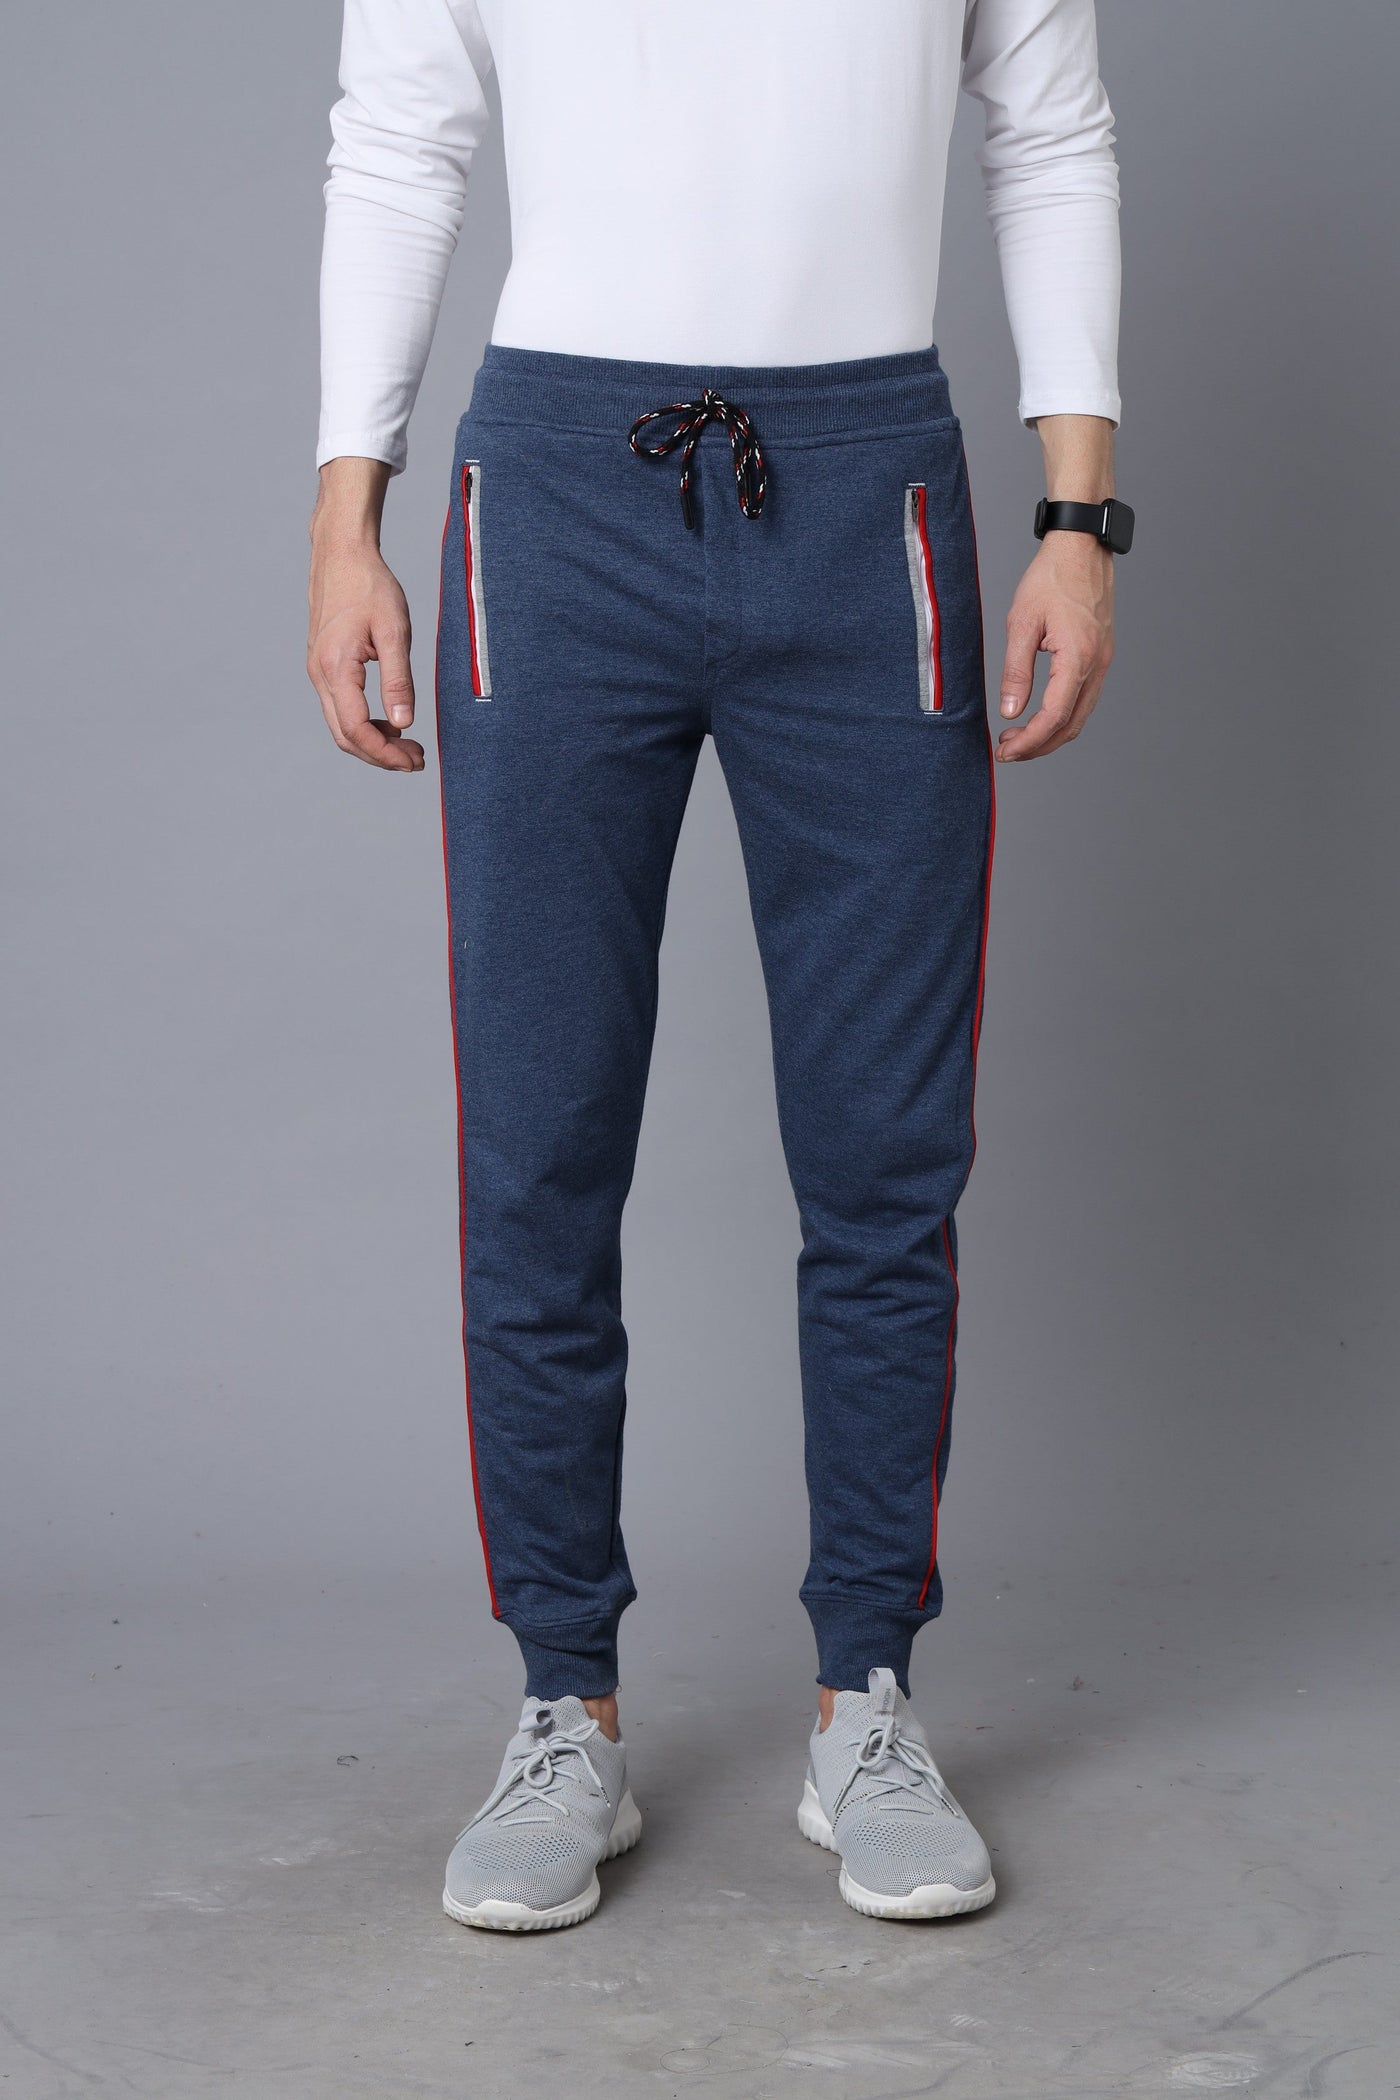 Blue track pants with zipper pockets